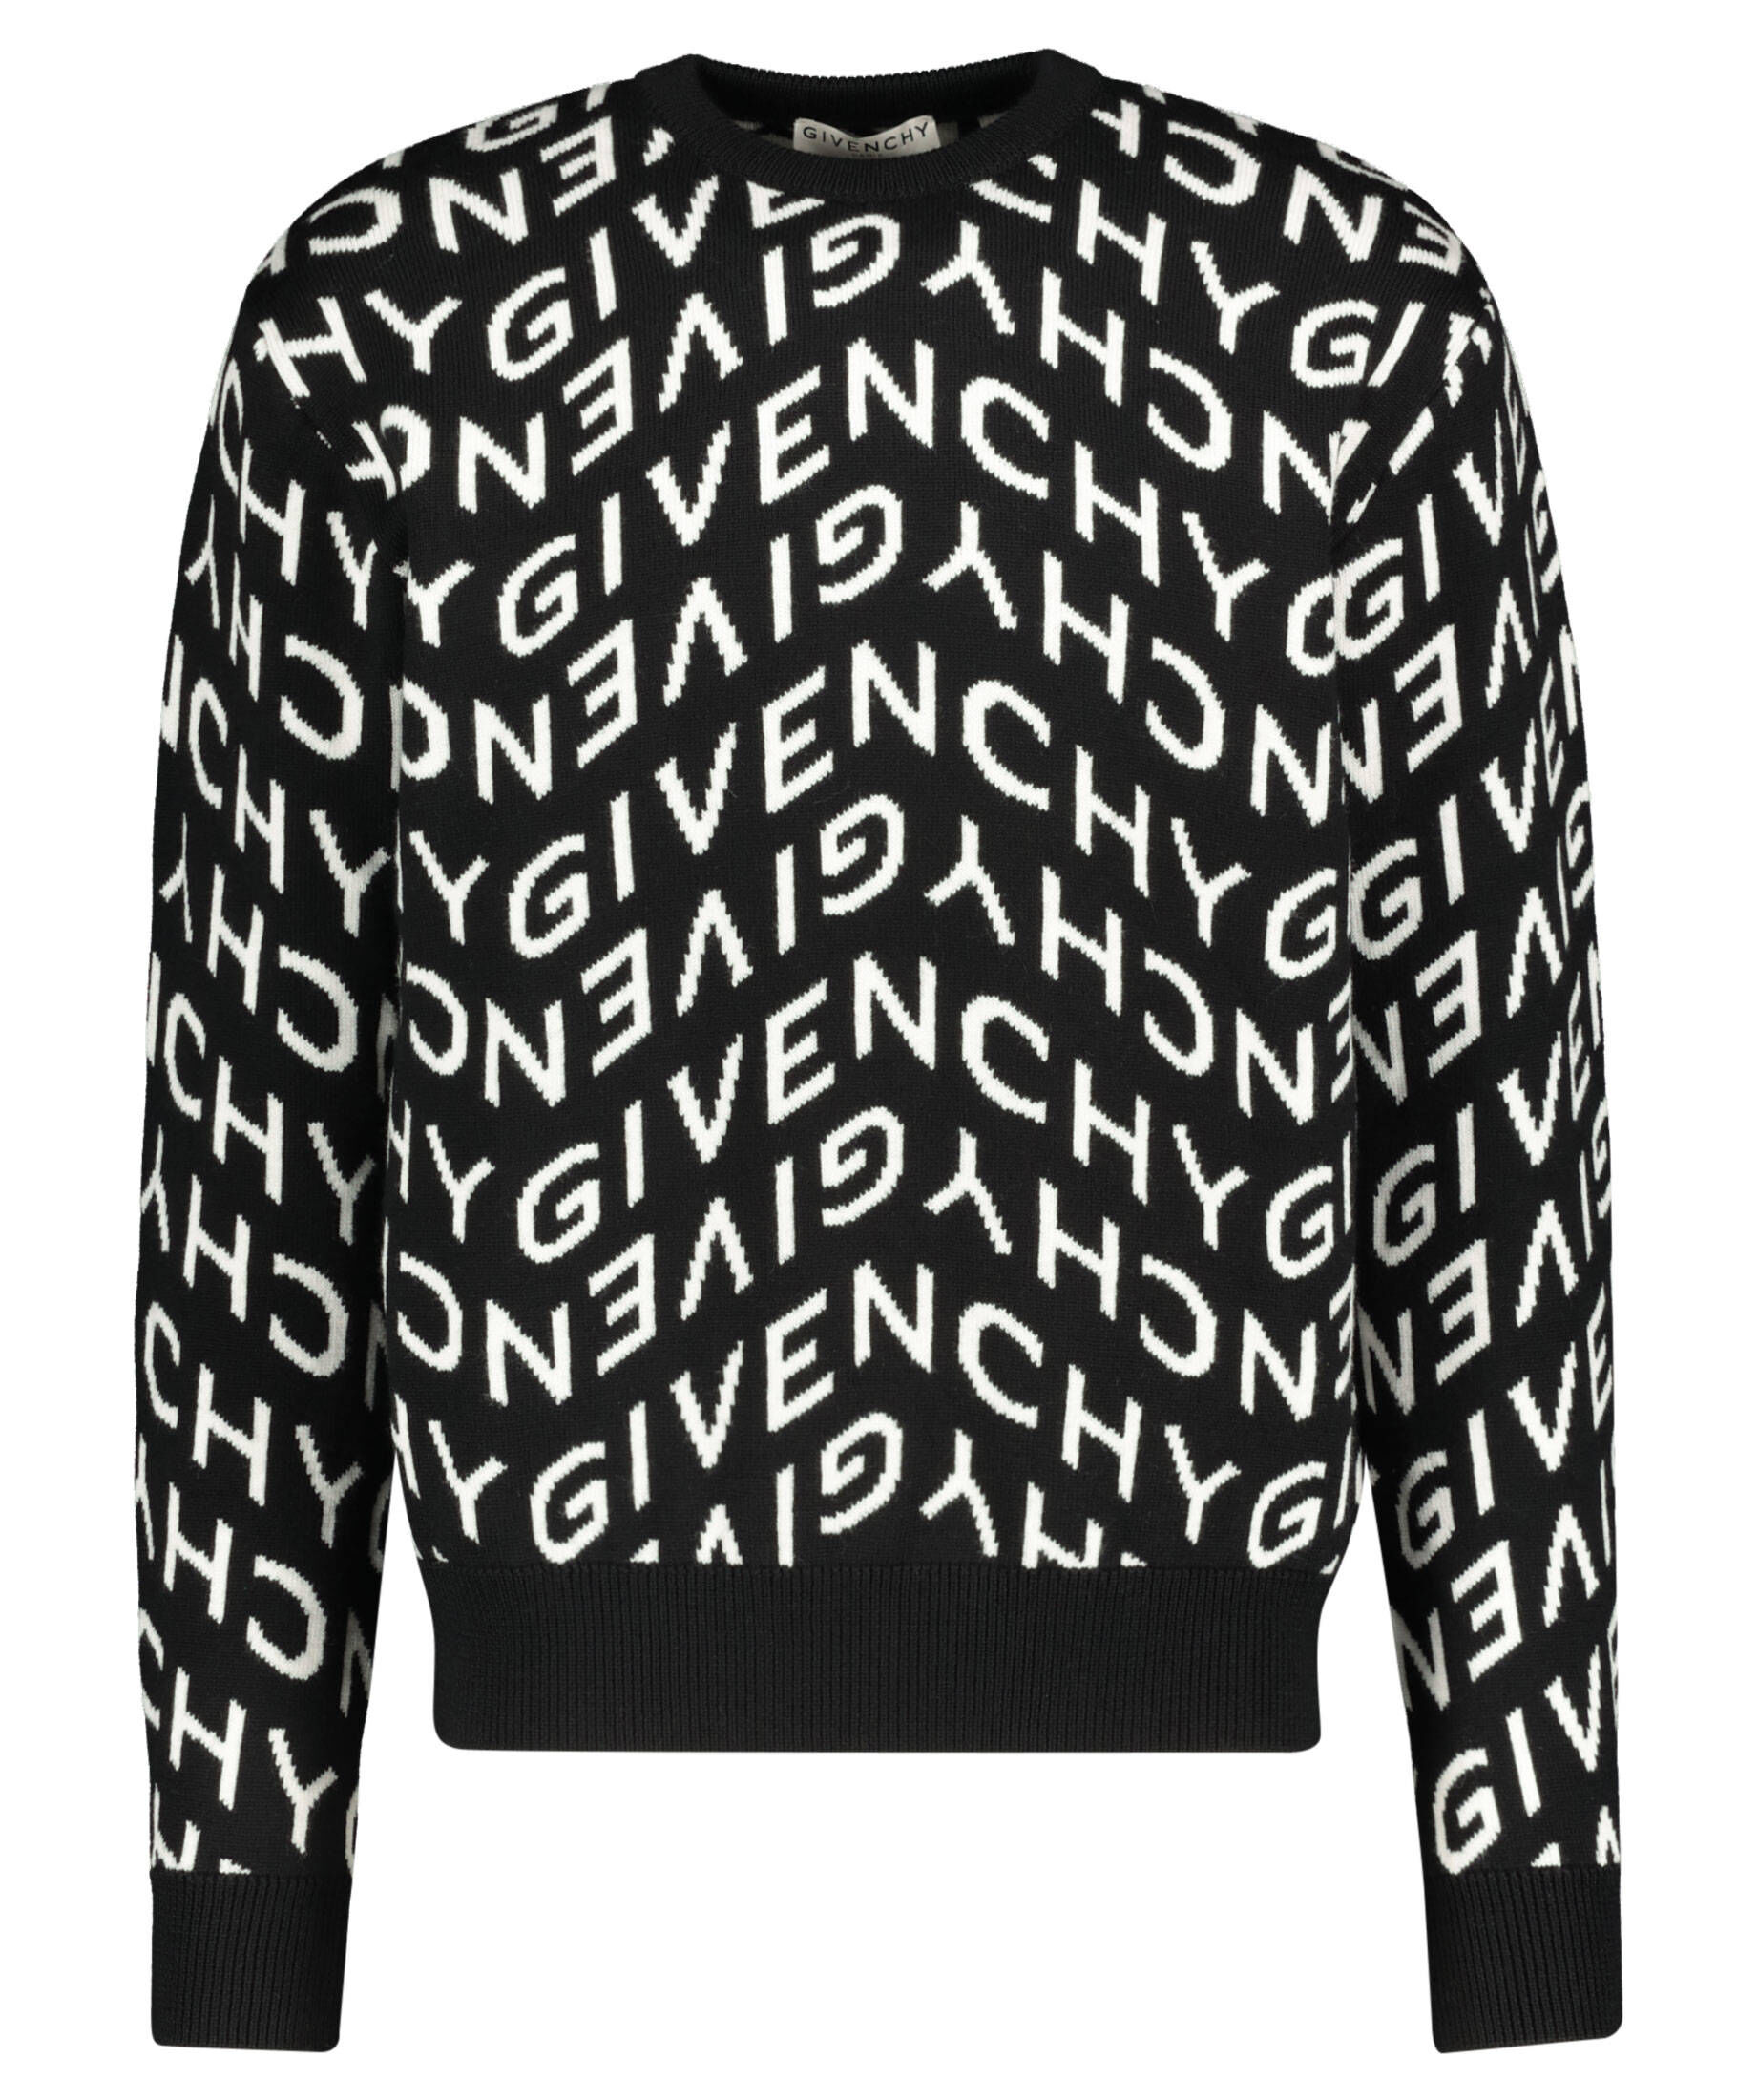 Pullover GIVENCHY 2 Pullover Givenchy Herren M schwarz Herren Kleidung Givenchy Herren Pullover & Strickjacken Givenchy Herren Pullover Givenchy Herren 